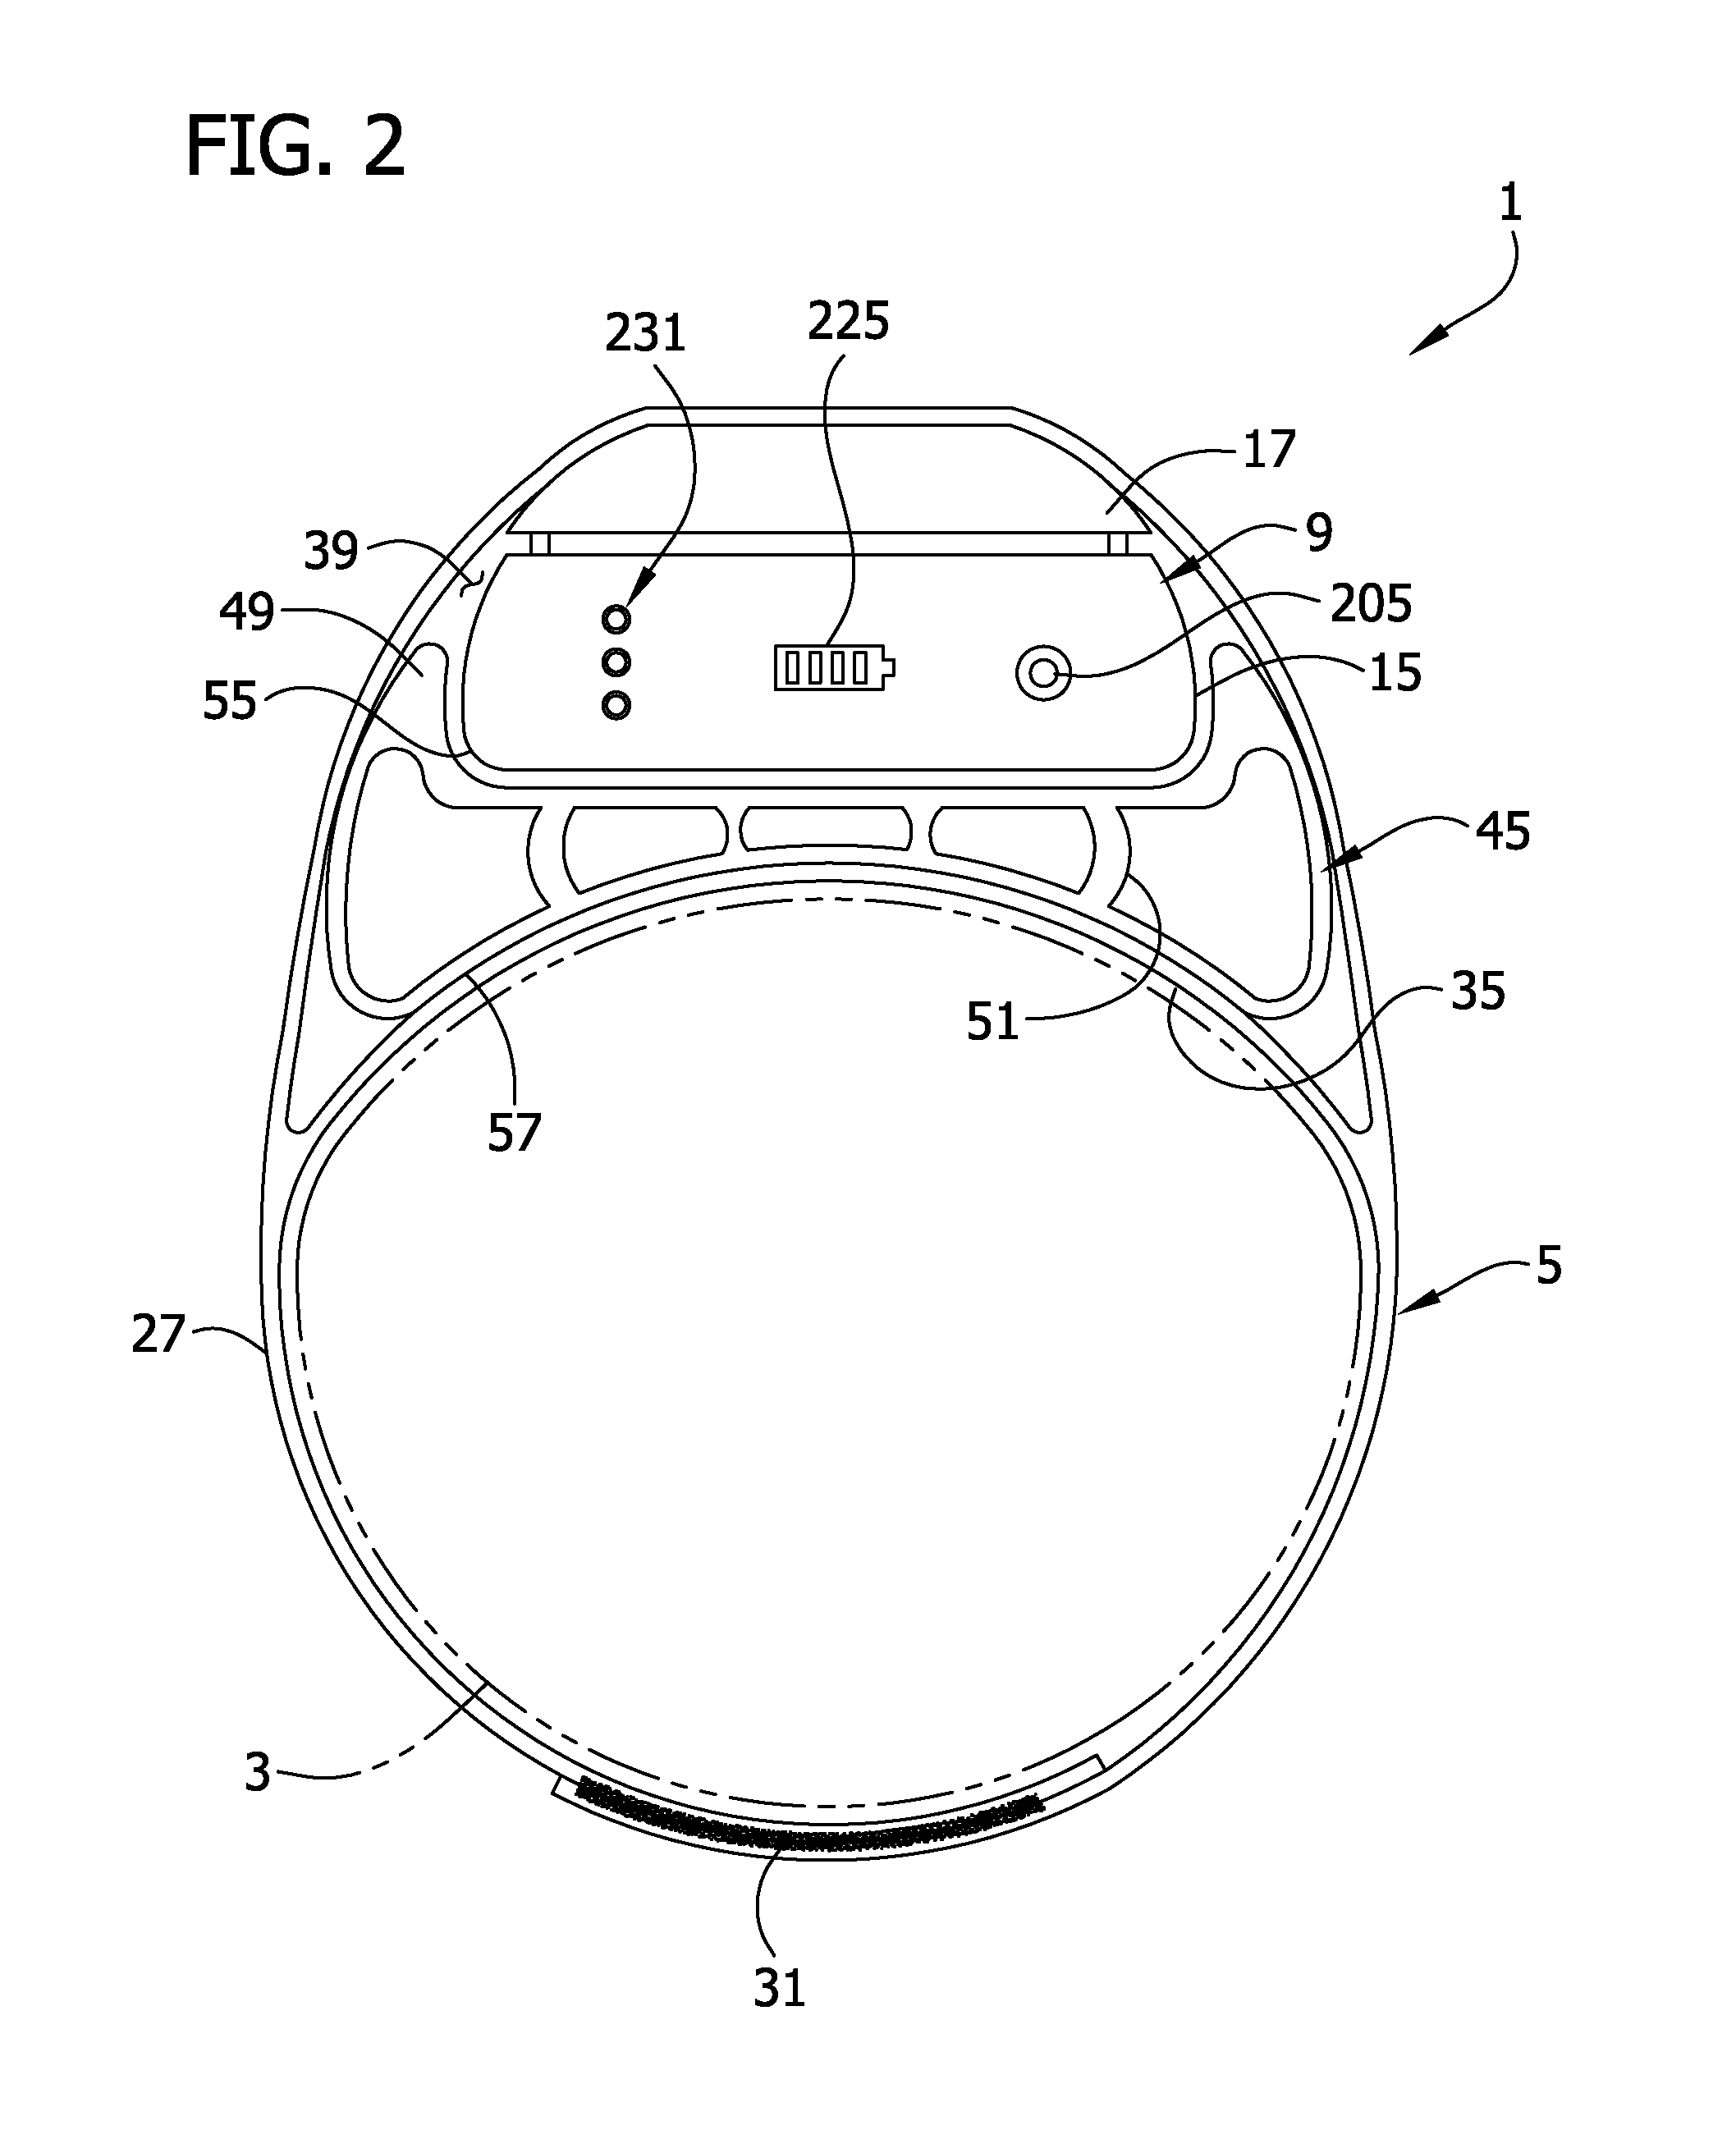 Disposable band for a compression device